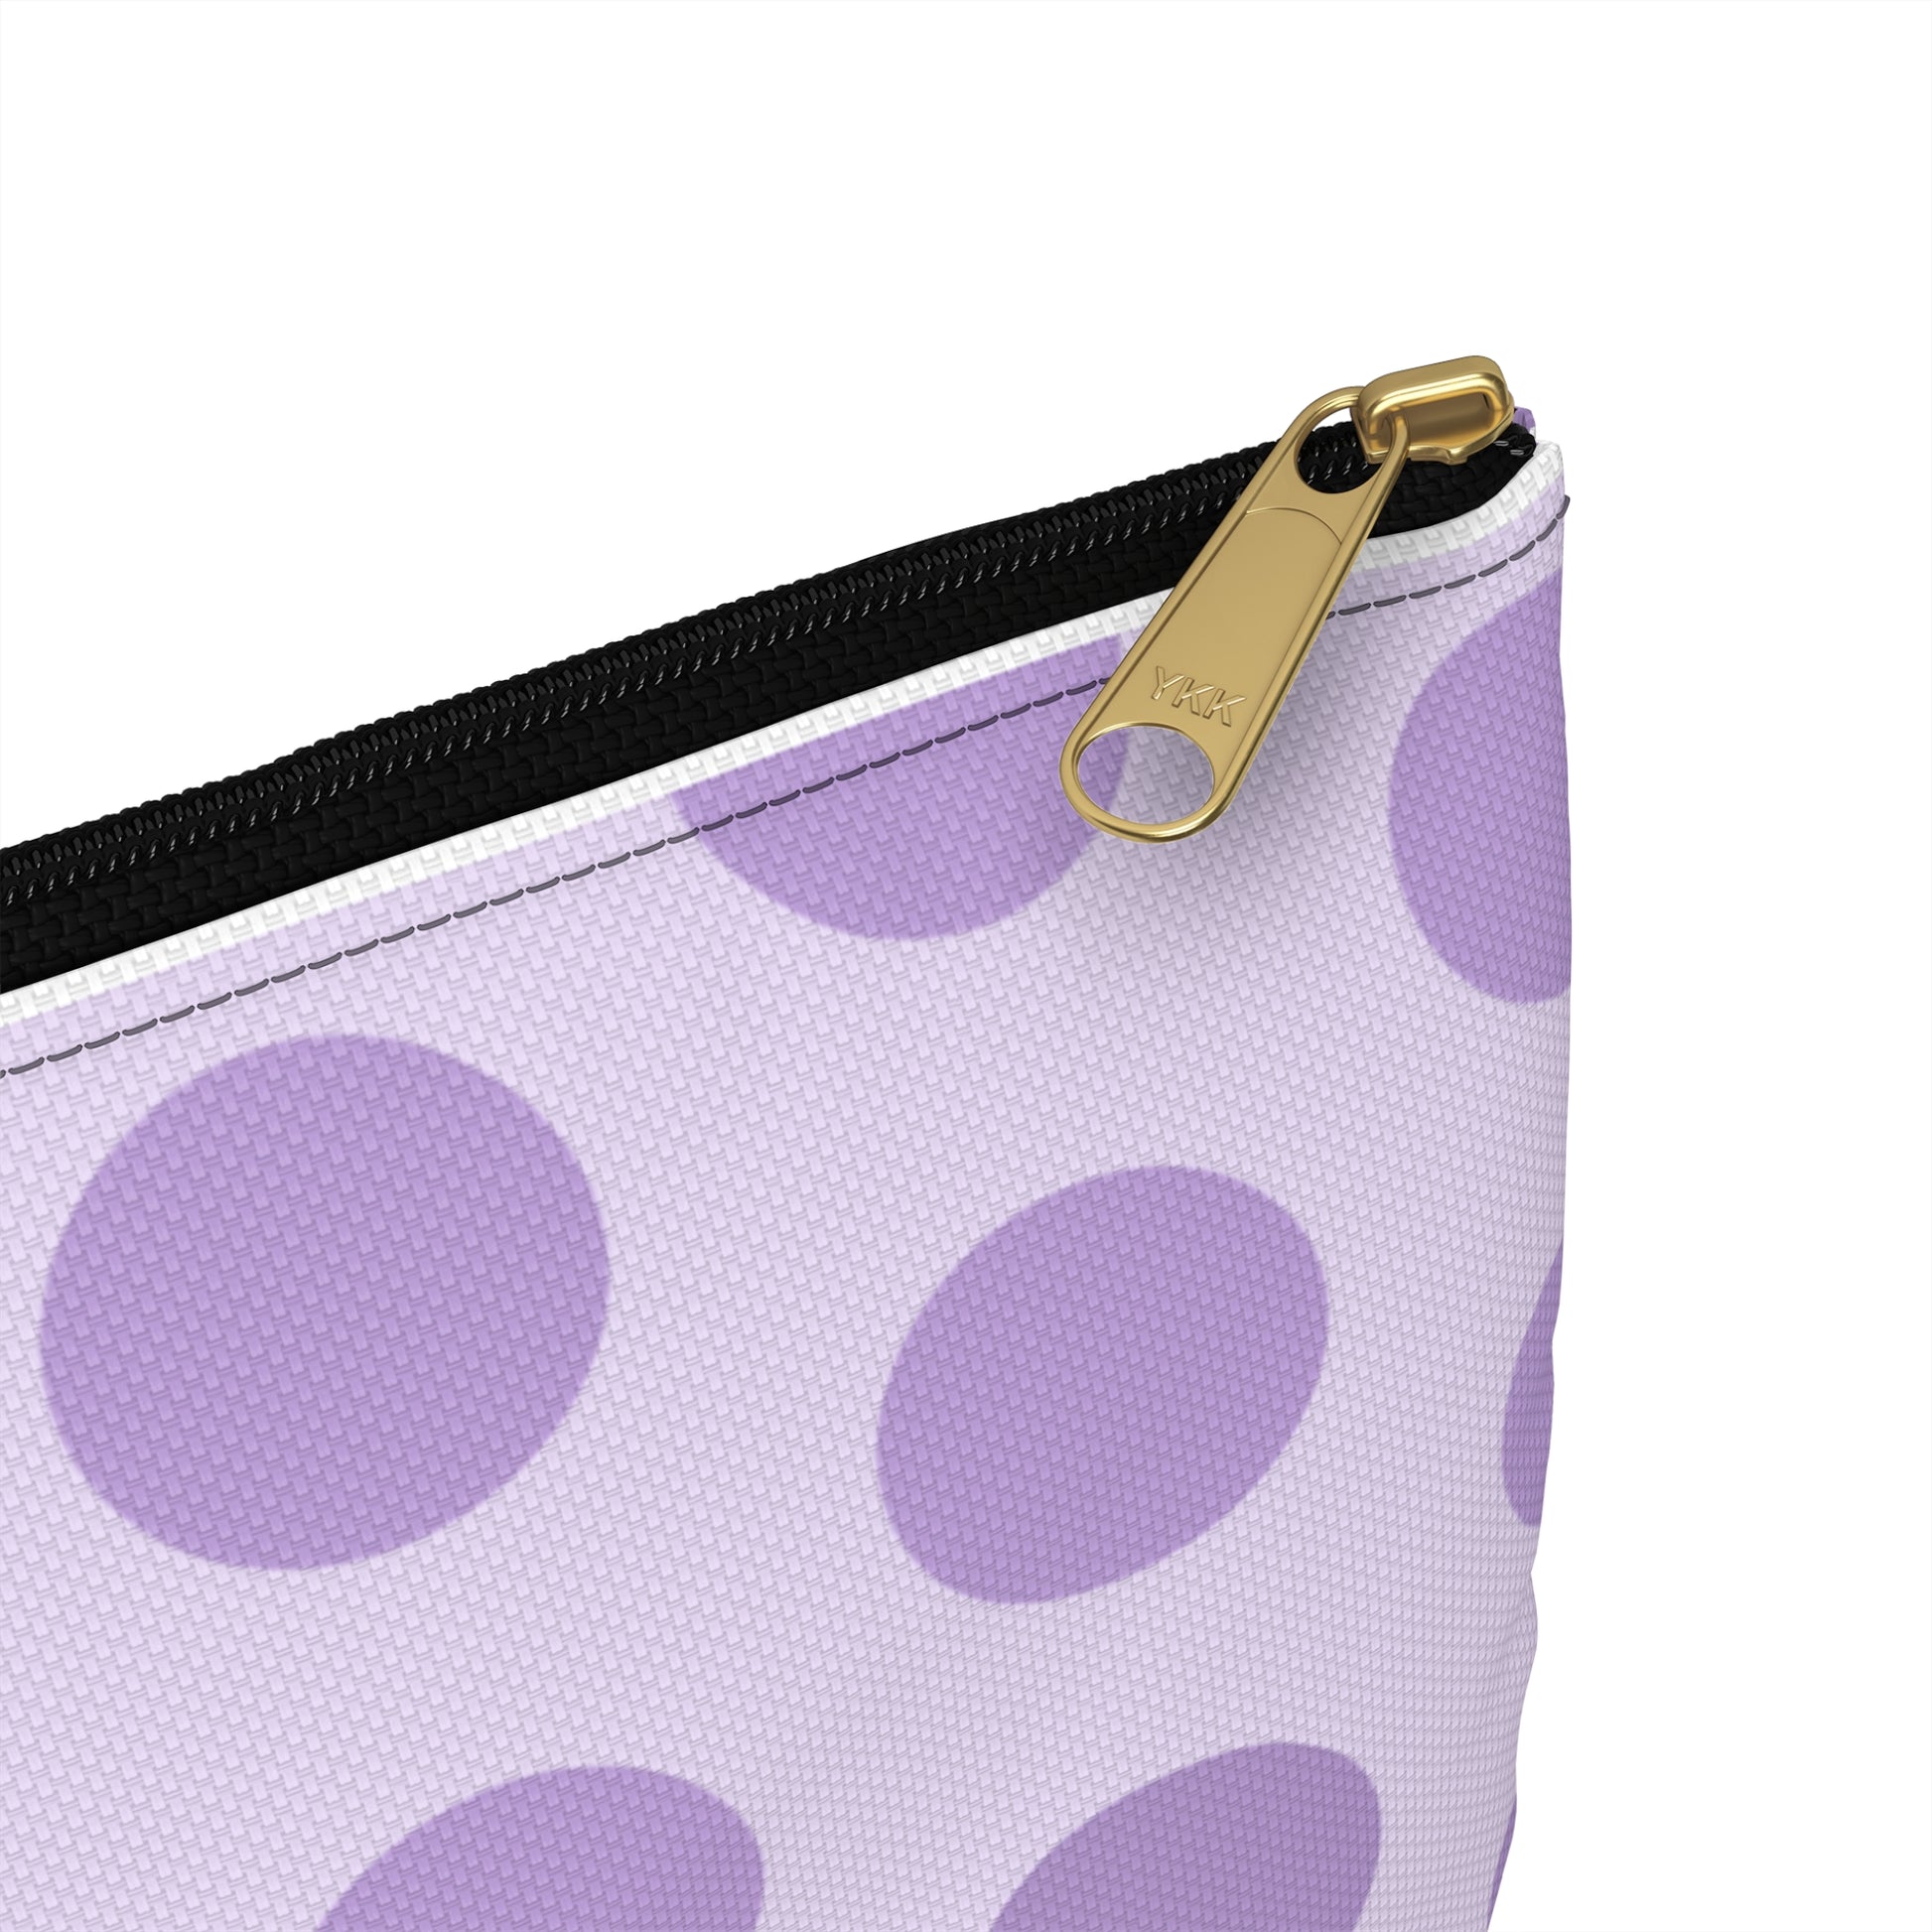 a purple and white polka dot purse with a gold zipper